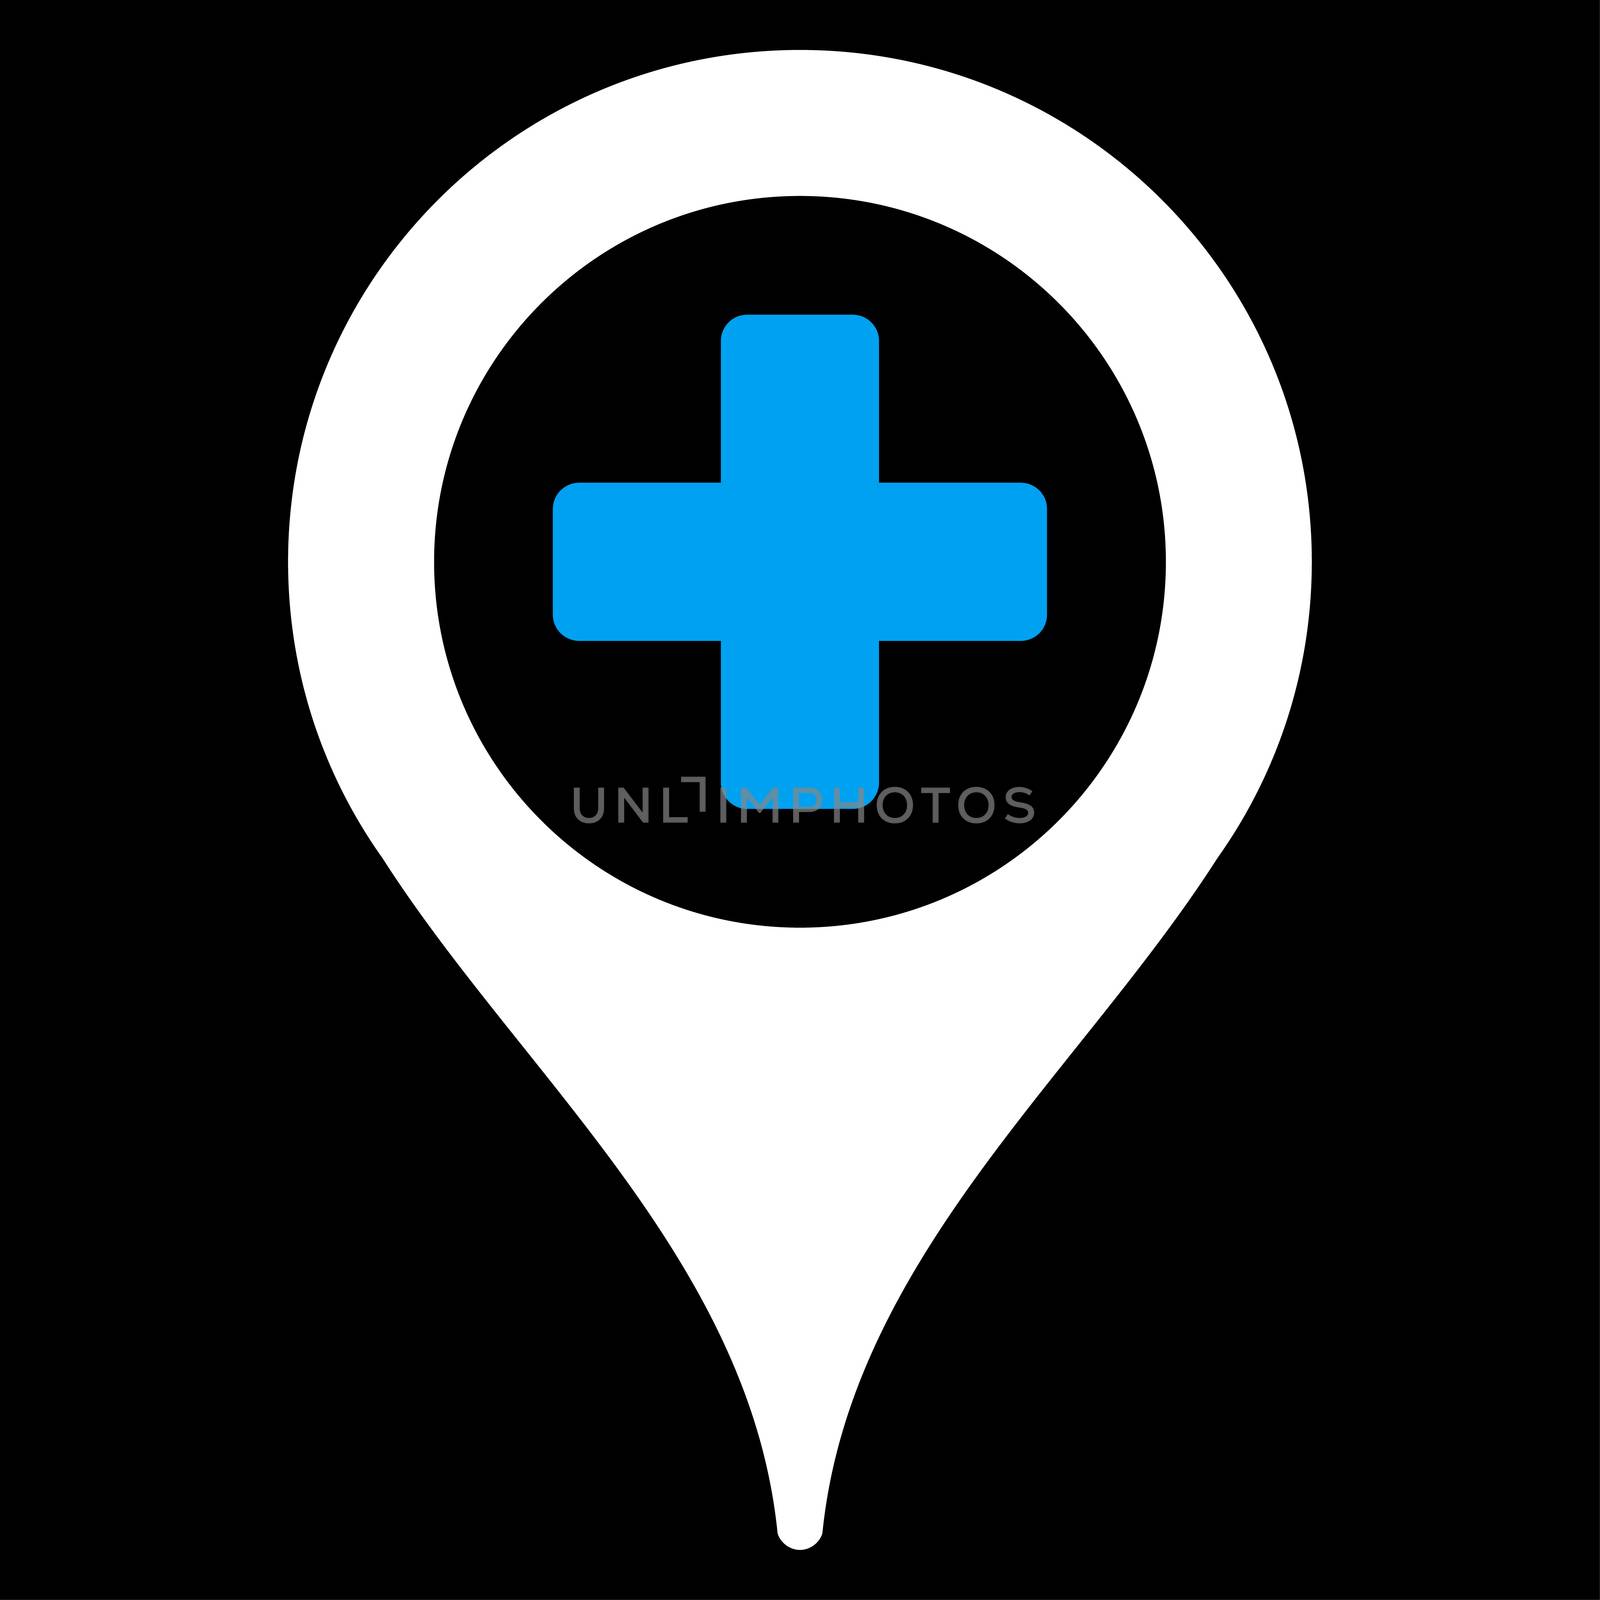 Clinic Pointer raster icon. Style is bicolor flat symbol, blue and white colors, rounded angles, black background.